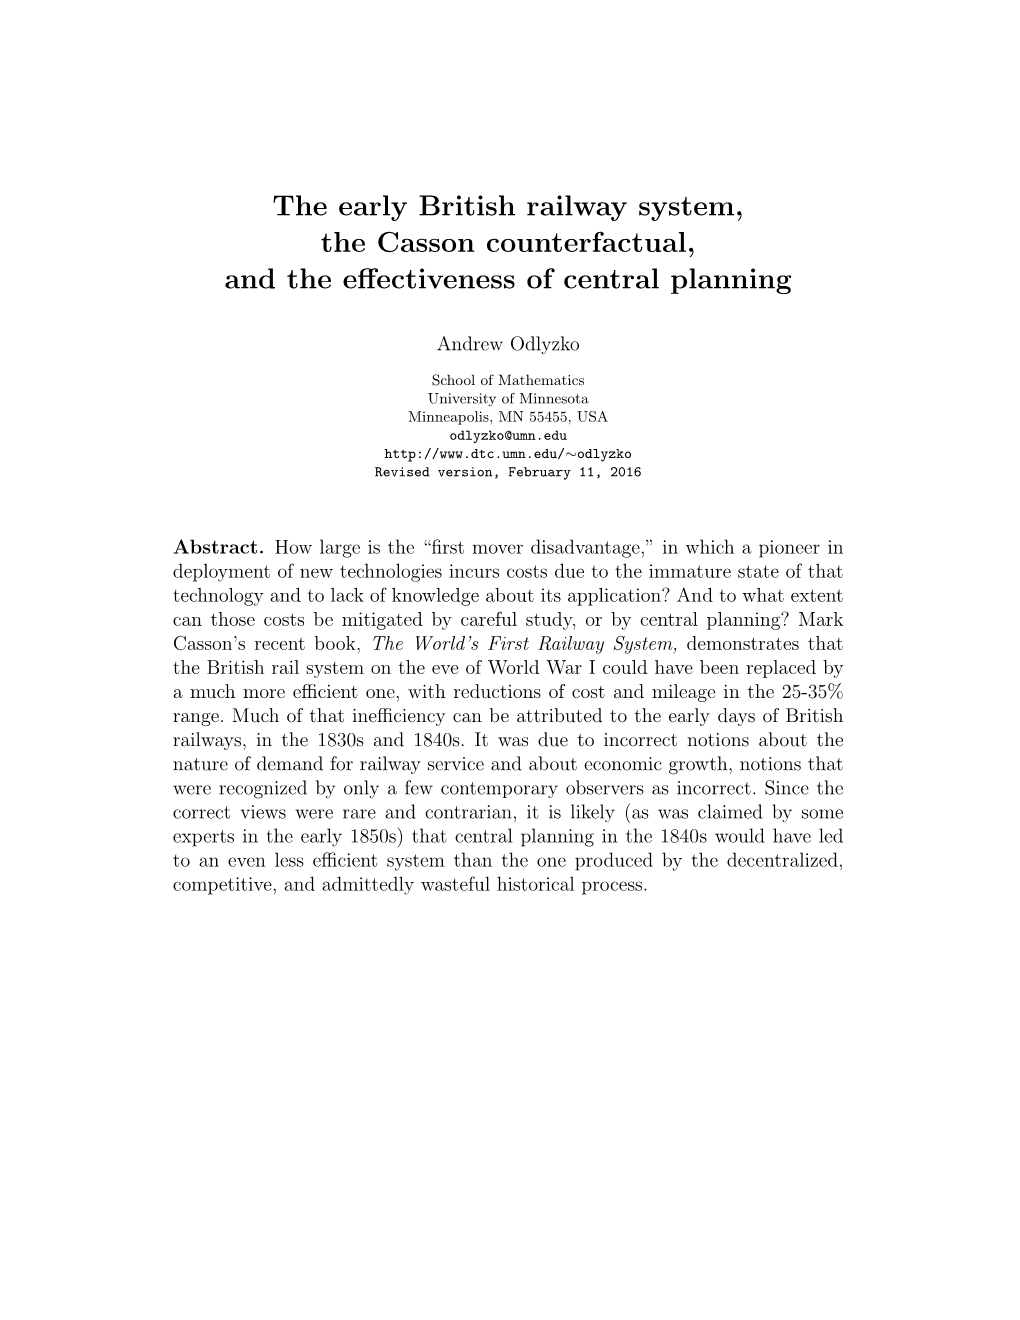 The Early British Railway System, the Casson Counterfactual, and the Effectiveness of Central Planning